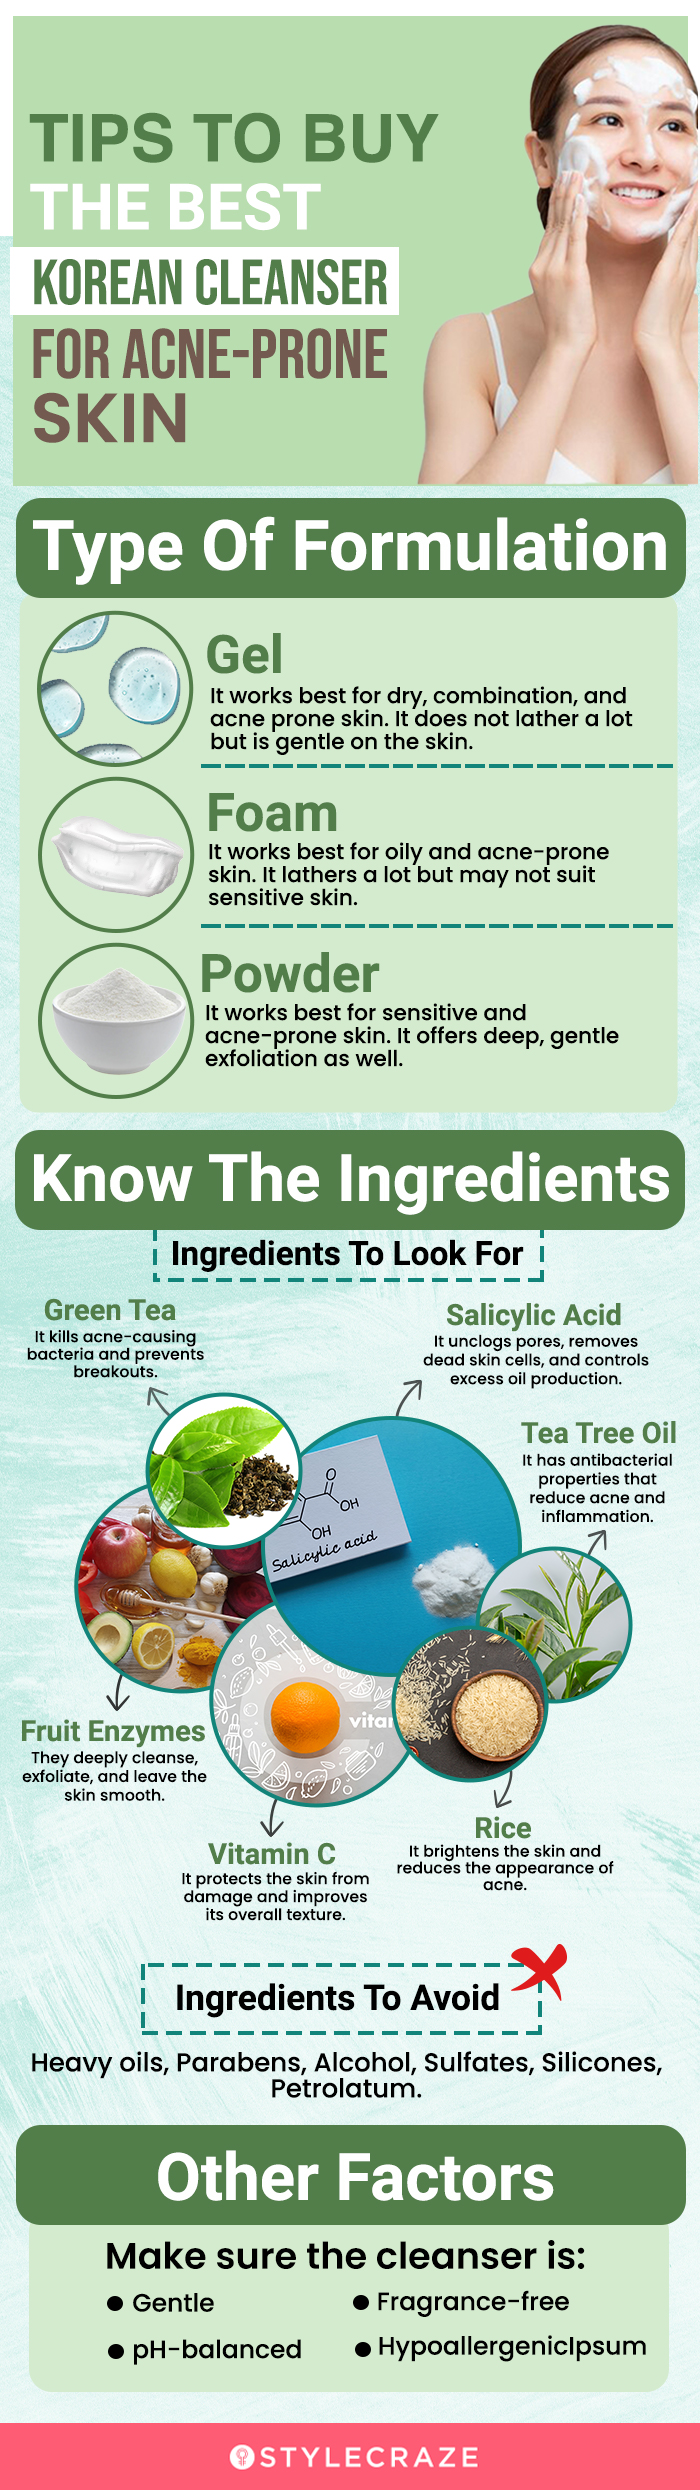 Tips To Buy The Best Korean Cleanser For Acne-Prone Skin [infographic]